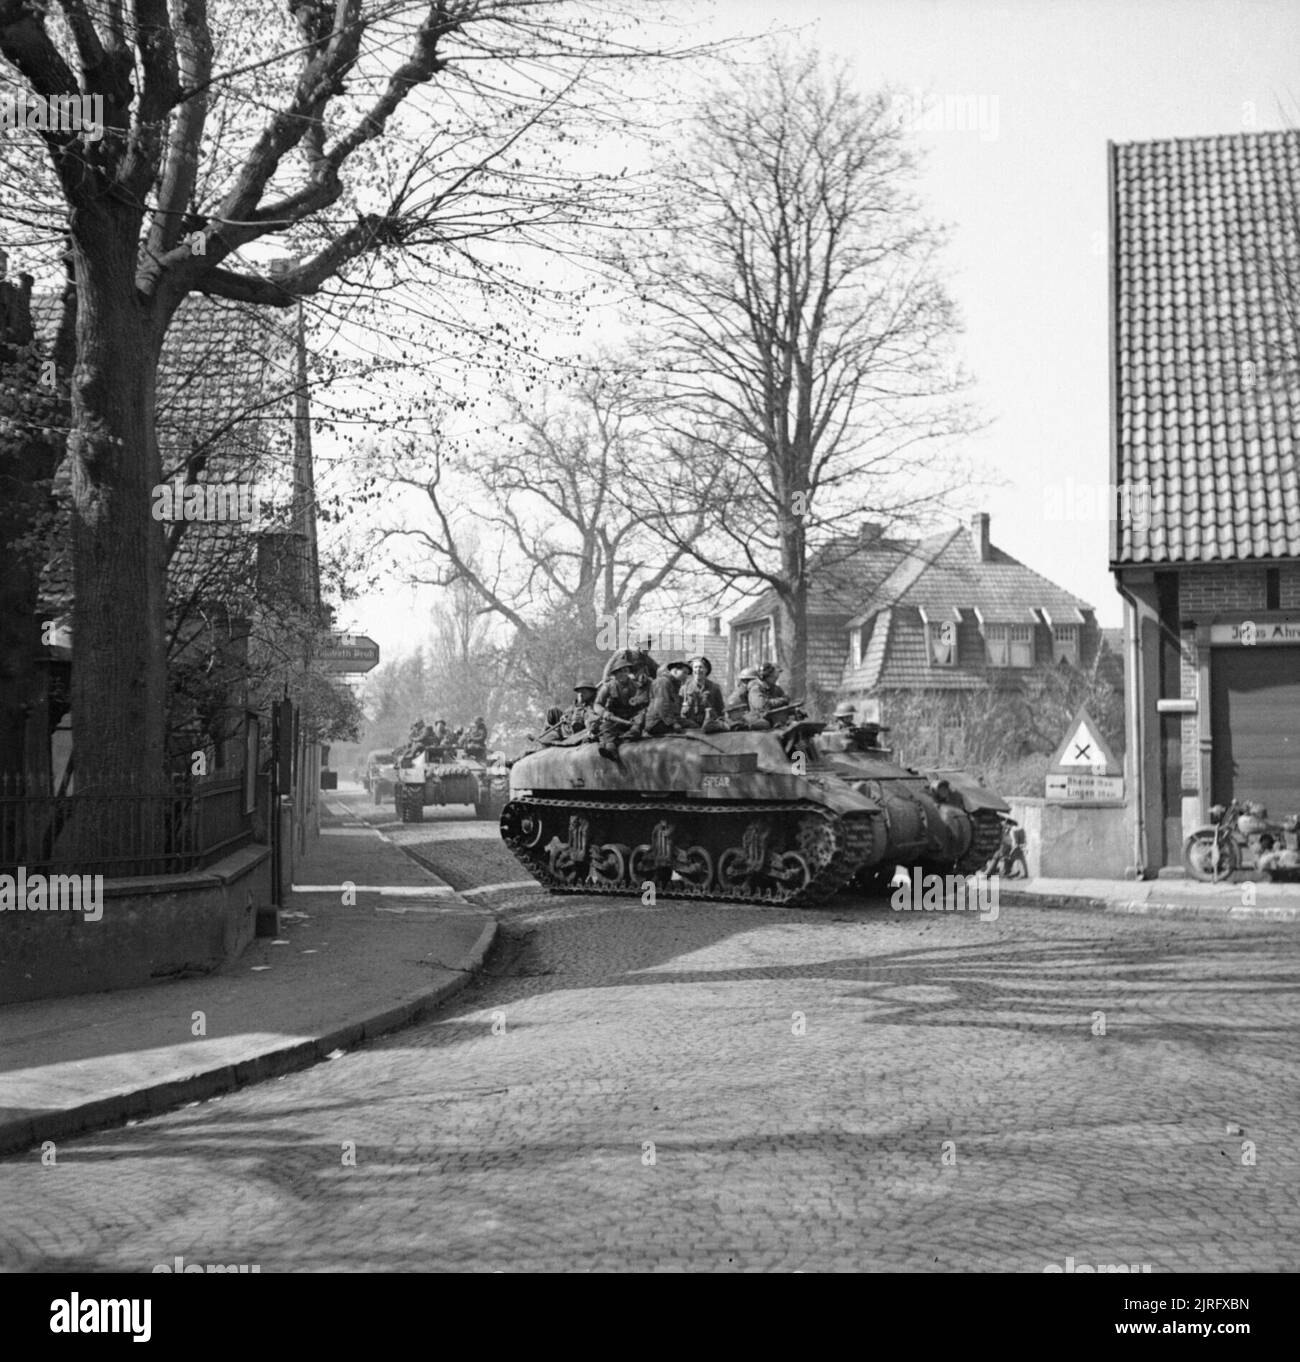 The British Army in North-west Europe 1944-45 Ram Kangaroo personnel carriers passing through Hopsten, 8 April 1945. Stock Photo